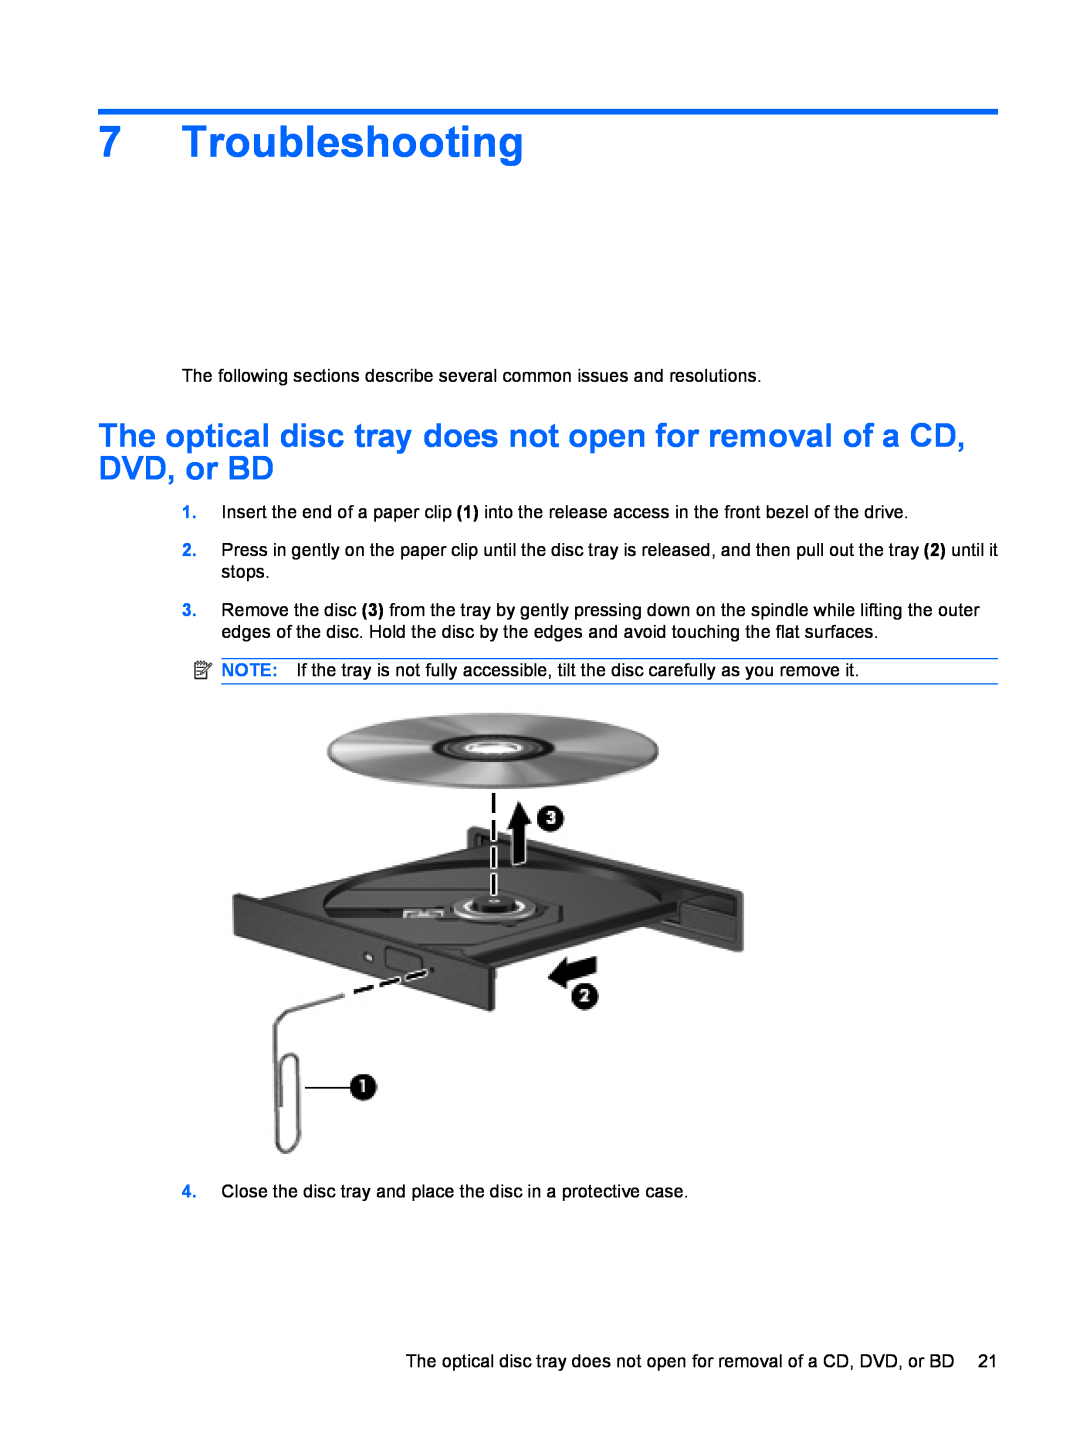 HP CQ61-325TU, CQ61-312TX, CQ61-313AX Troubleshooting, The optical disc tray does not open for removal of a CD, DVD, or BD 